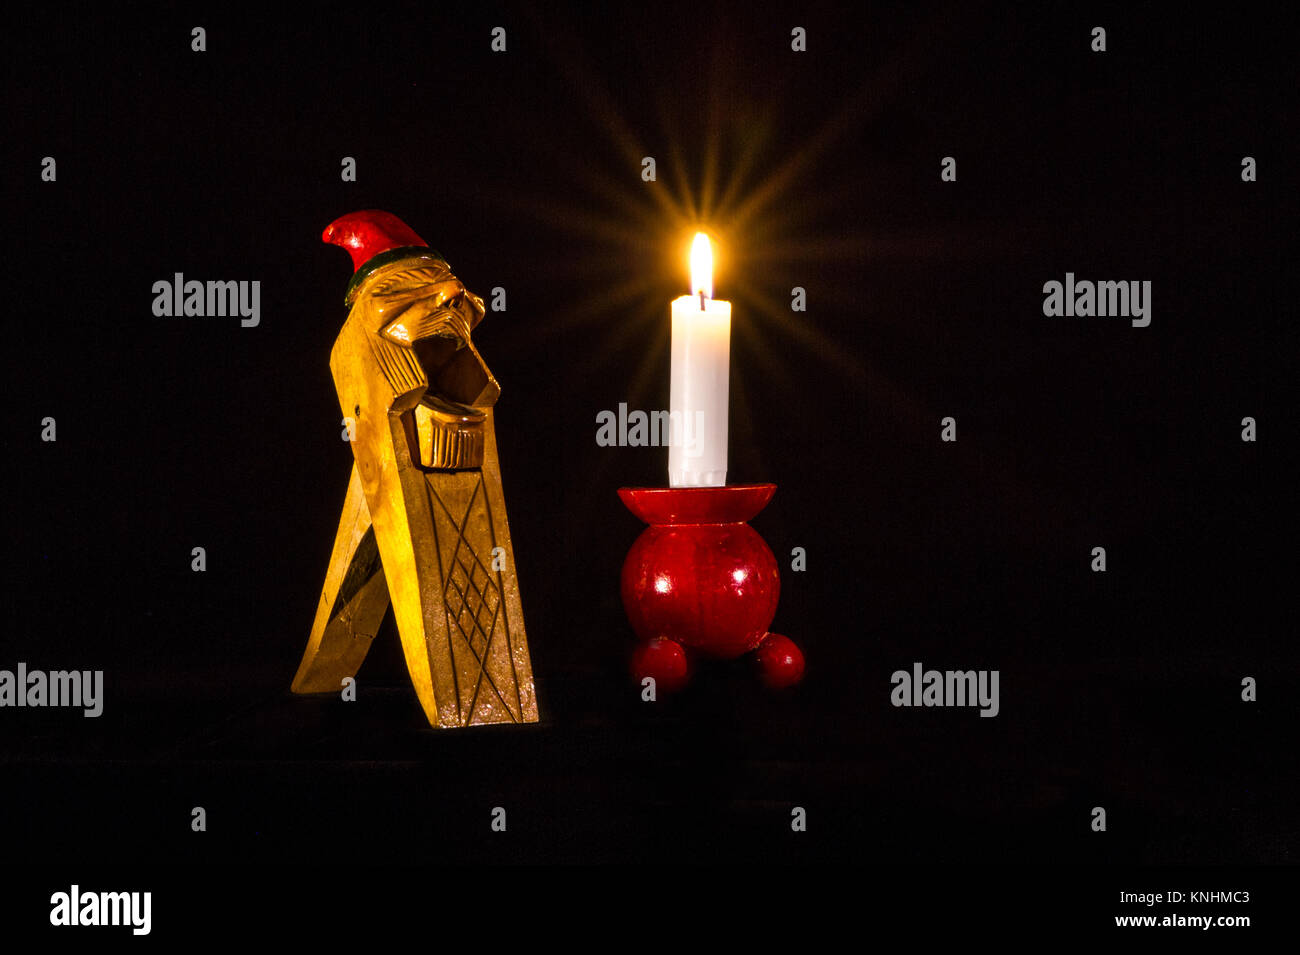 A Norwegian Gnome Handcarved Wooden Nut Cracker together with a candlelight on a typical red wooden candlestick. Stock Photo